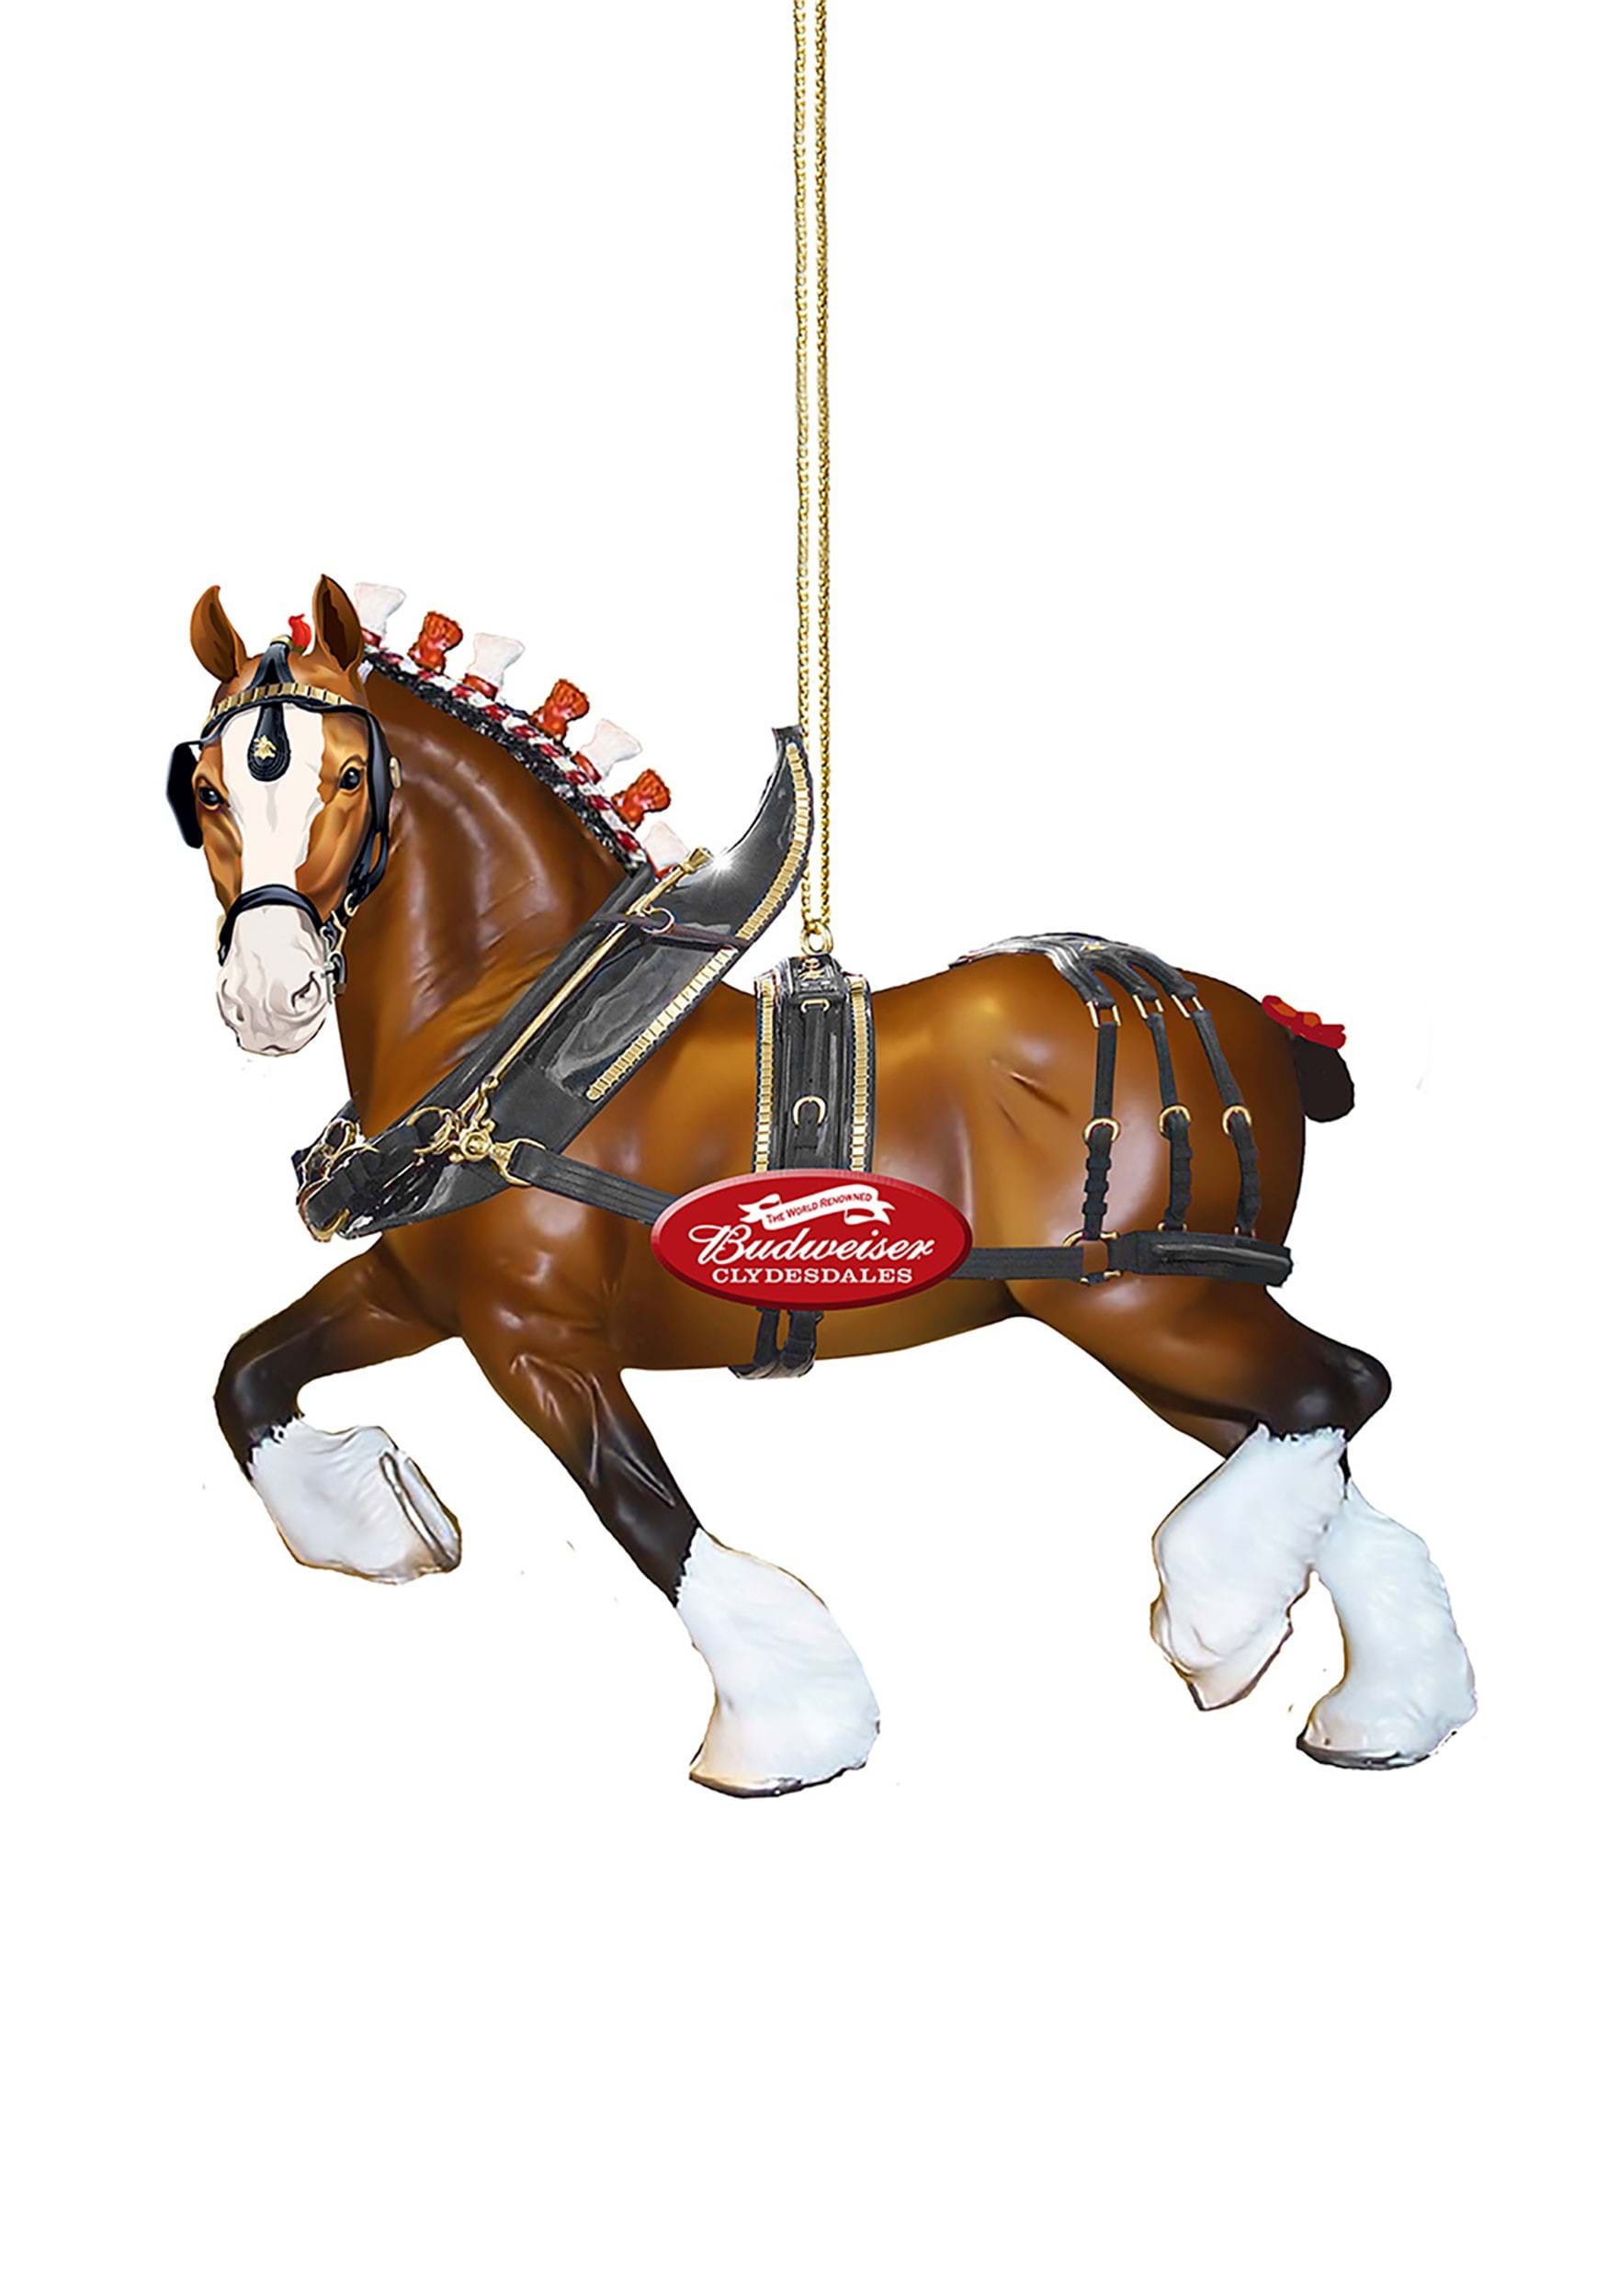 Clydesdale Horse Budweiser Molded Ornament